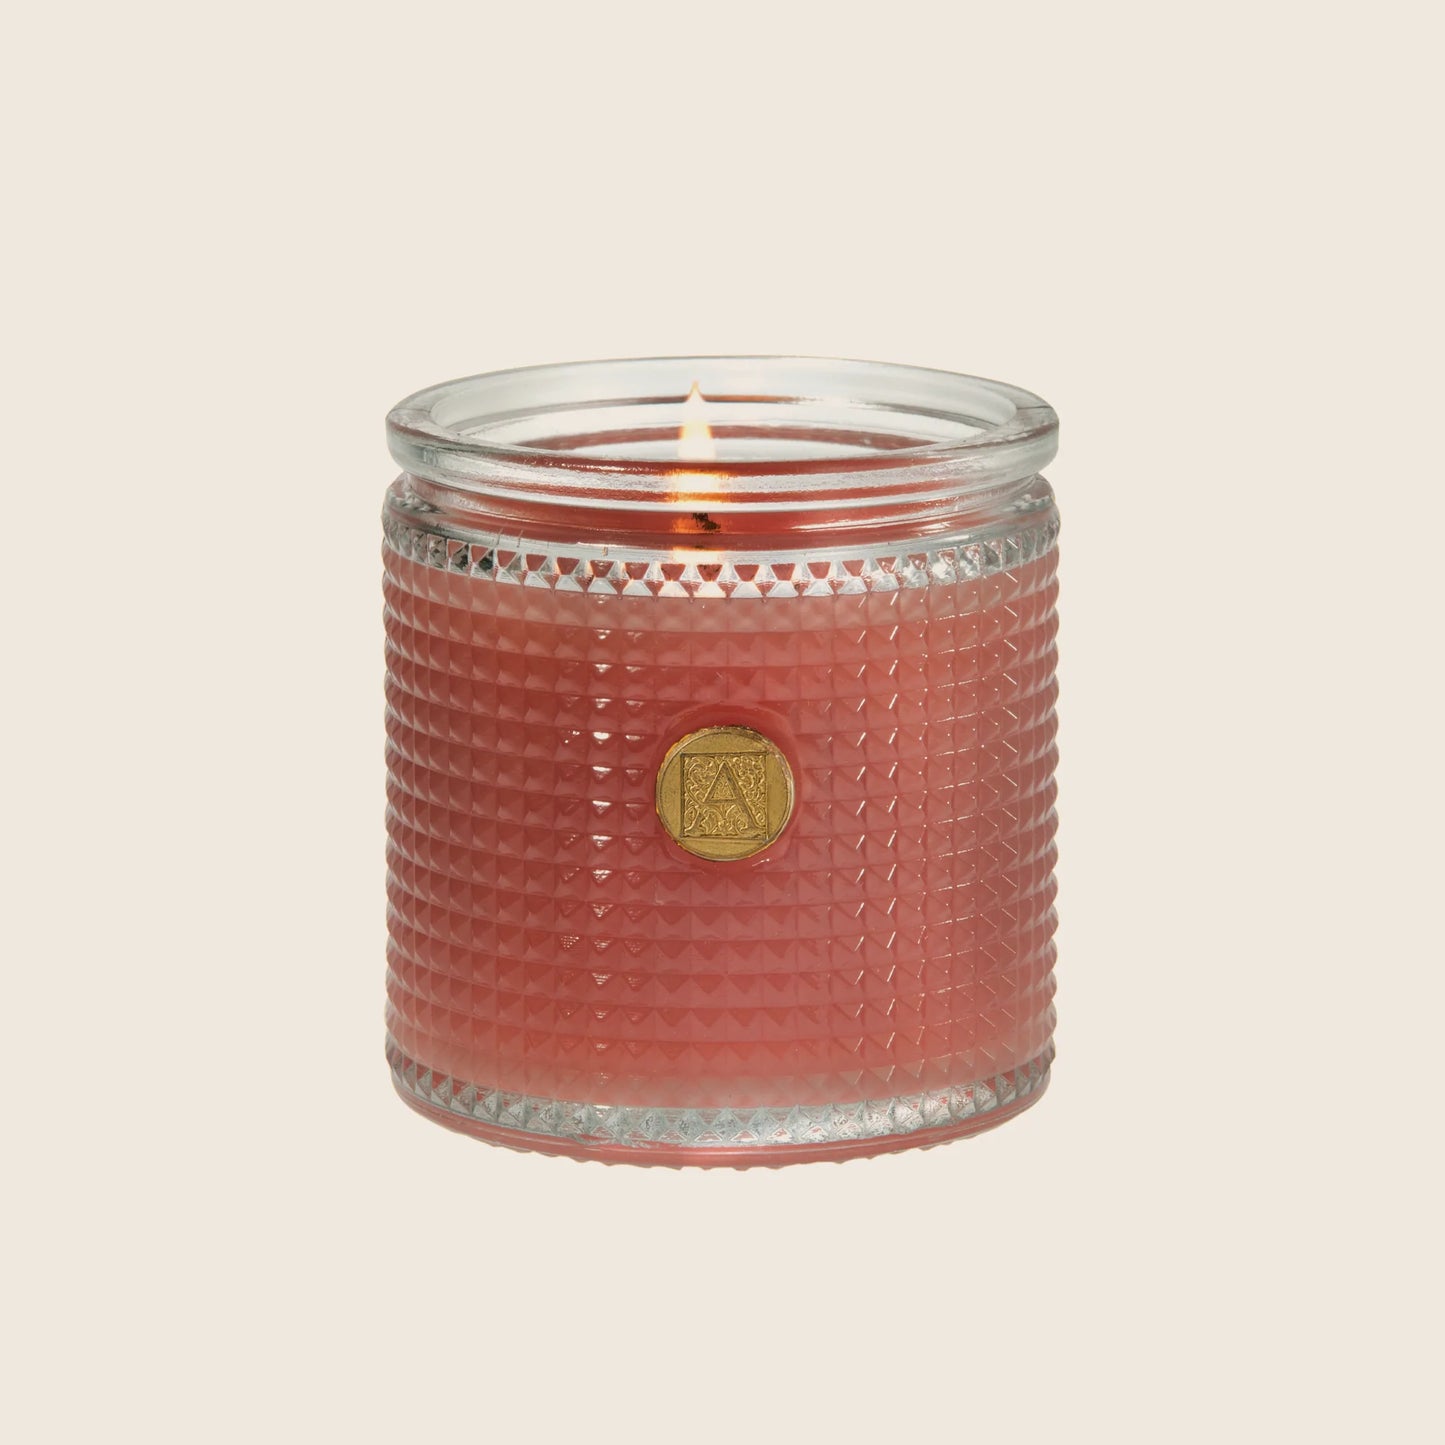 Pomelo Pomegranate - Textured Glass Candle